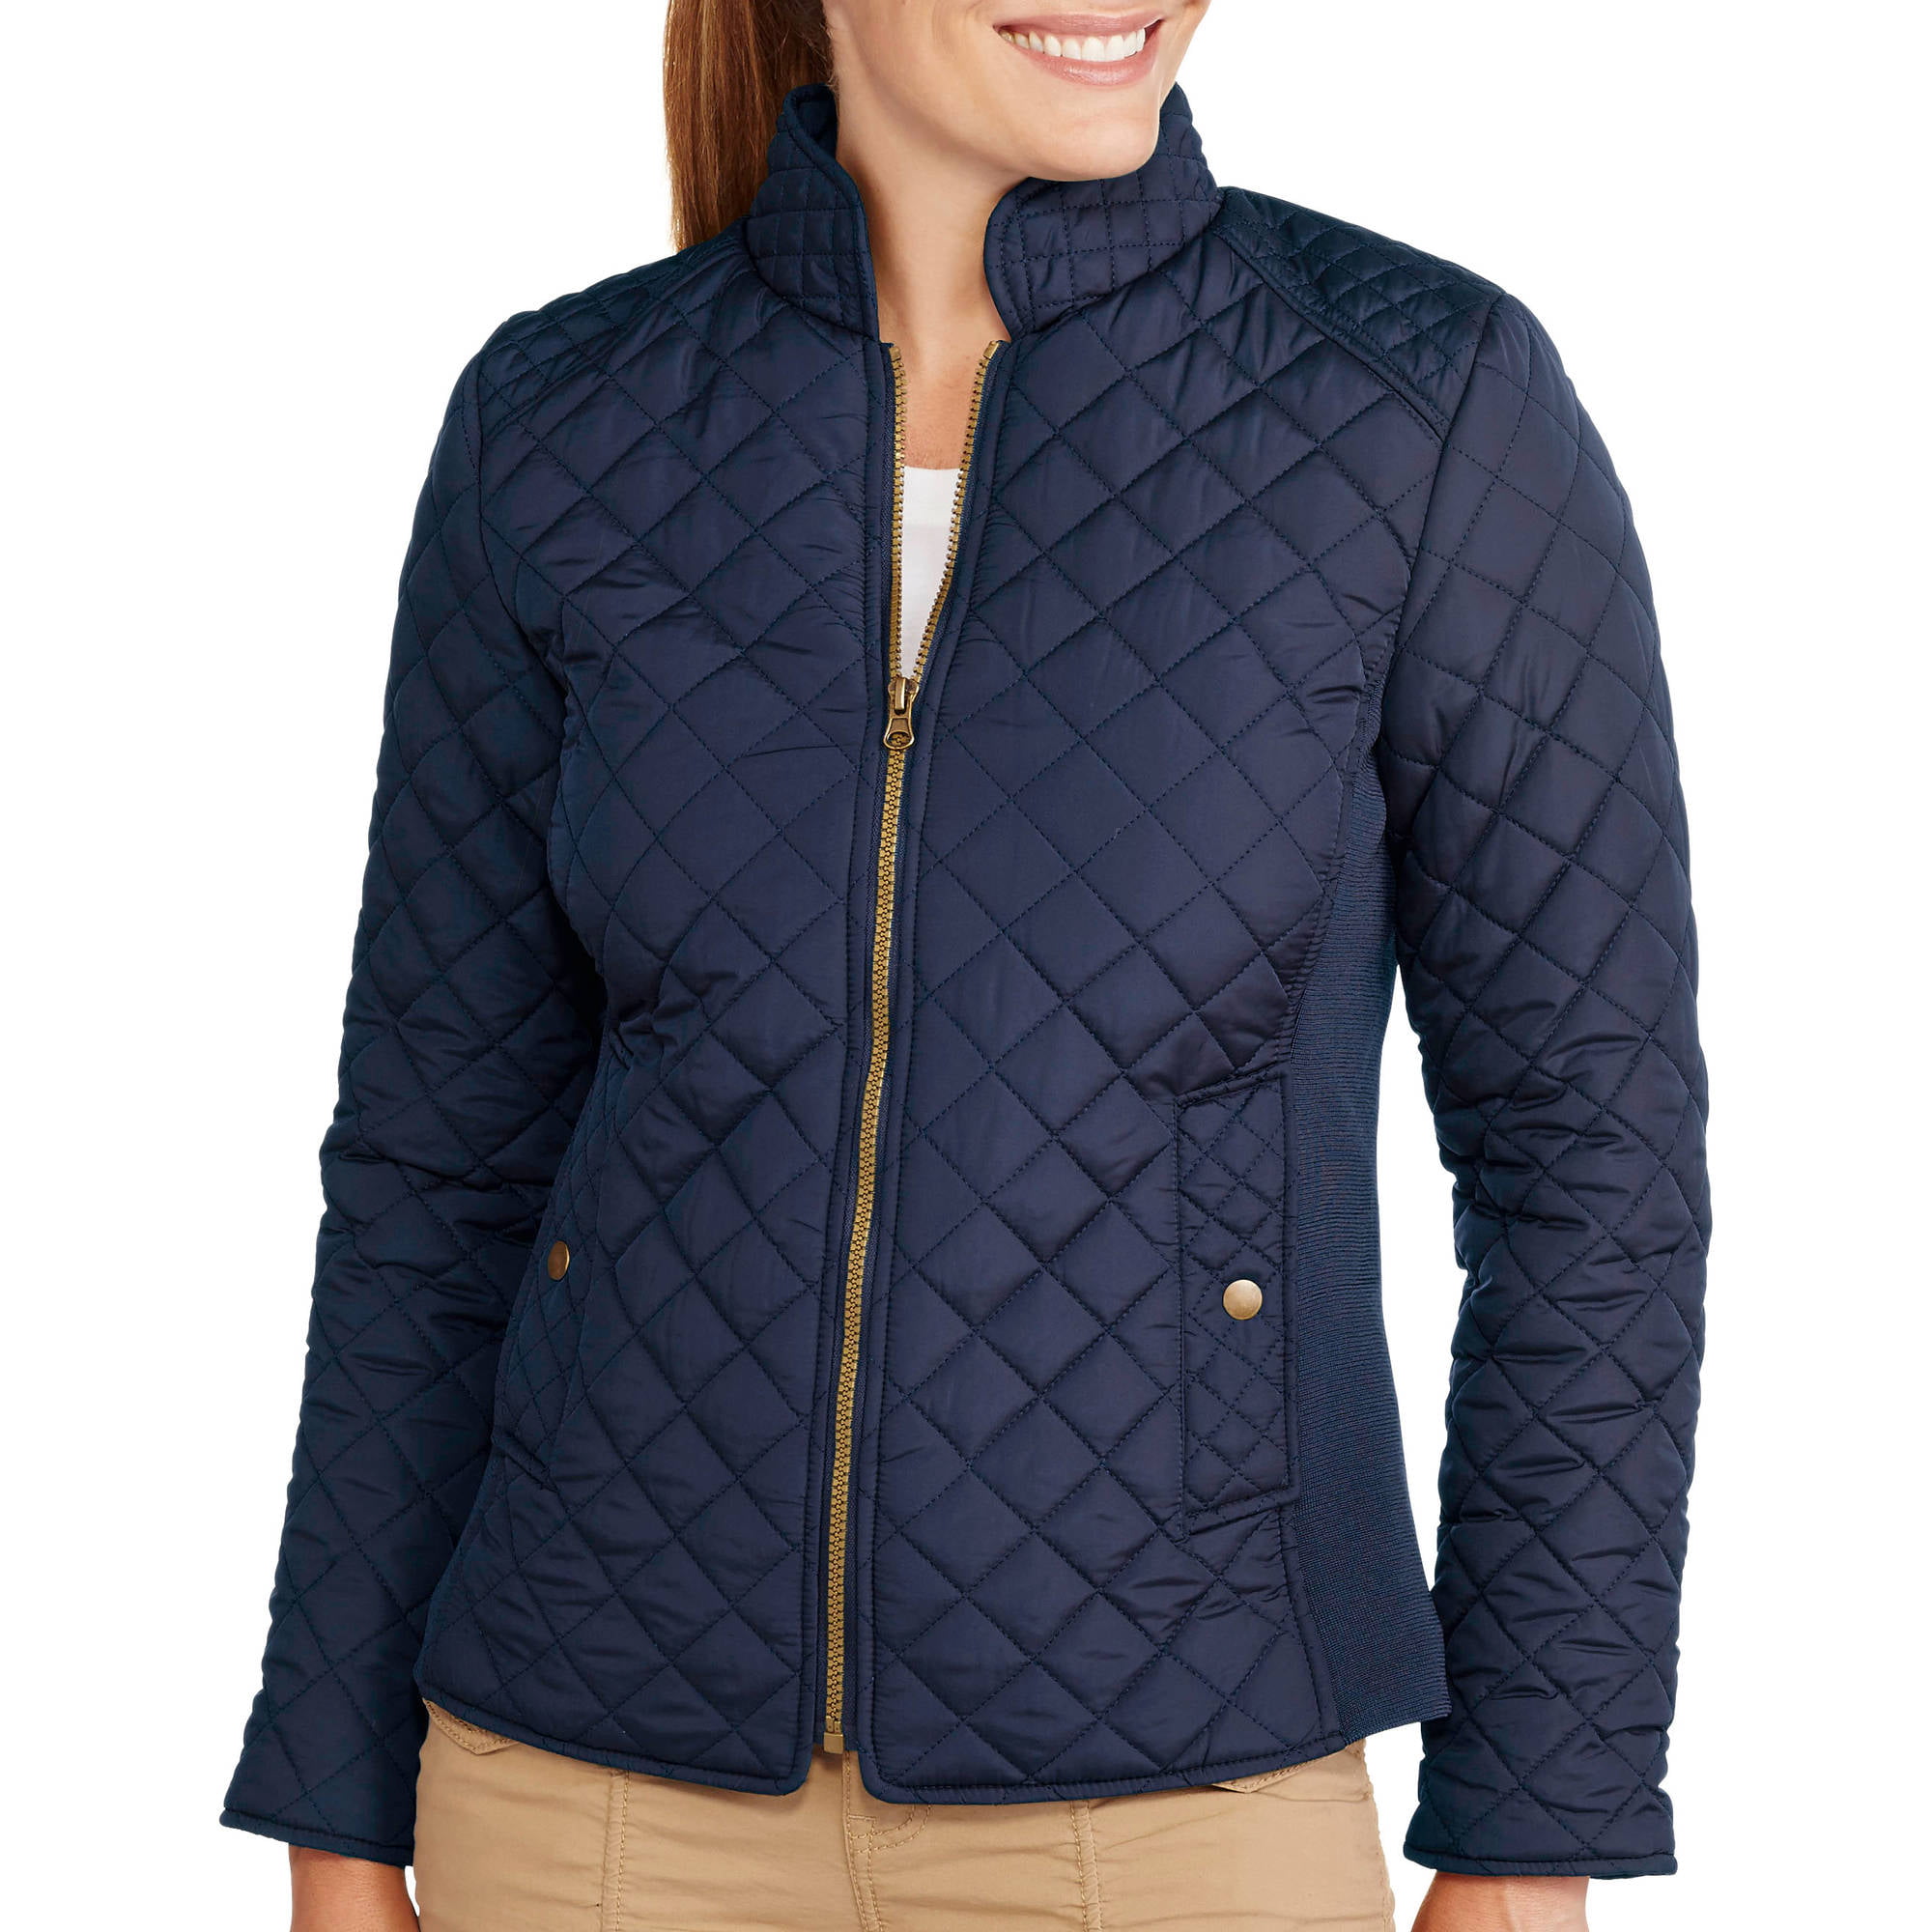 Womens Quilted Jacket - Coat Nj